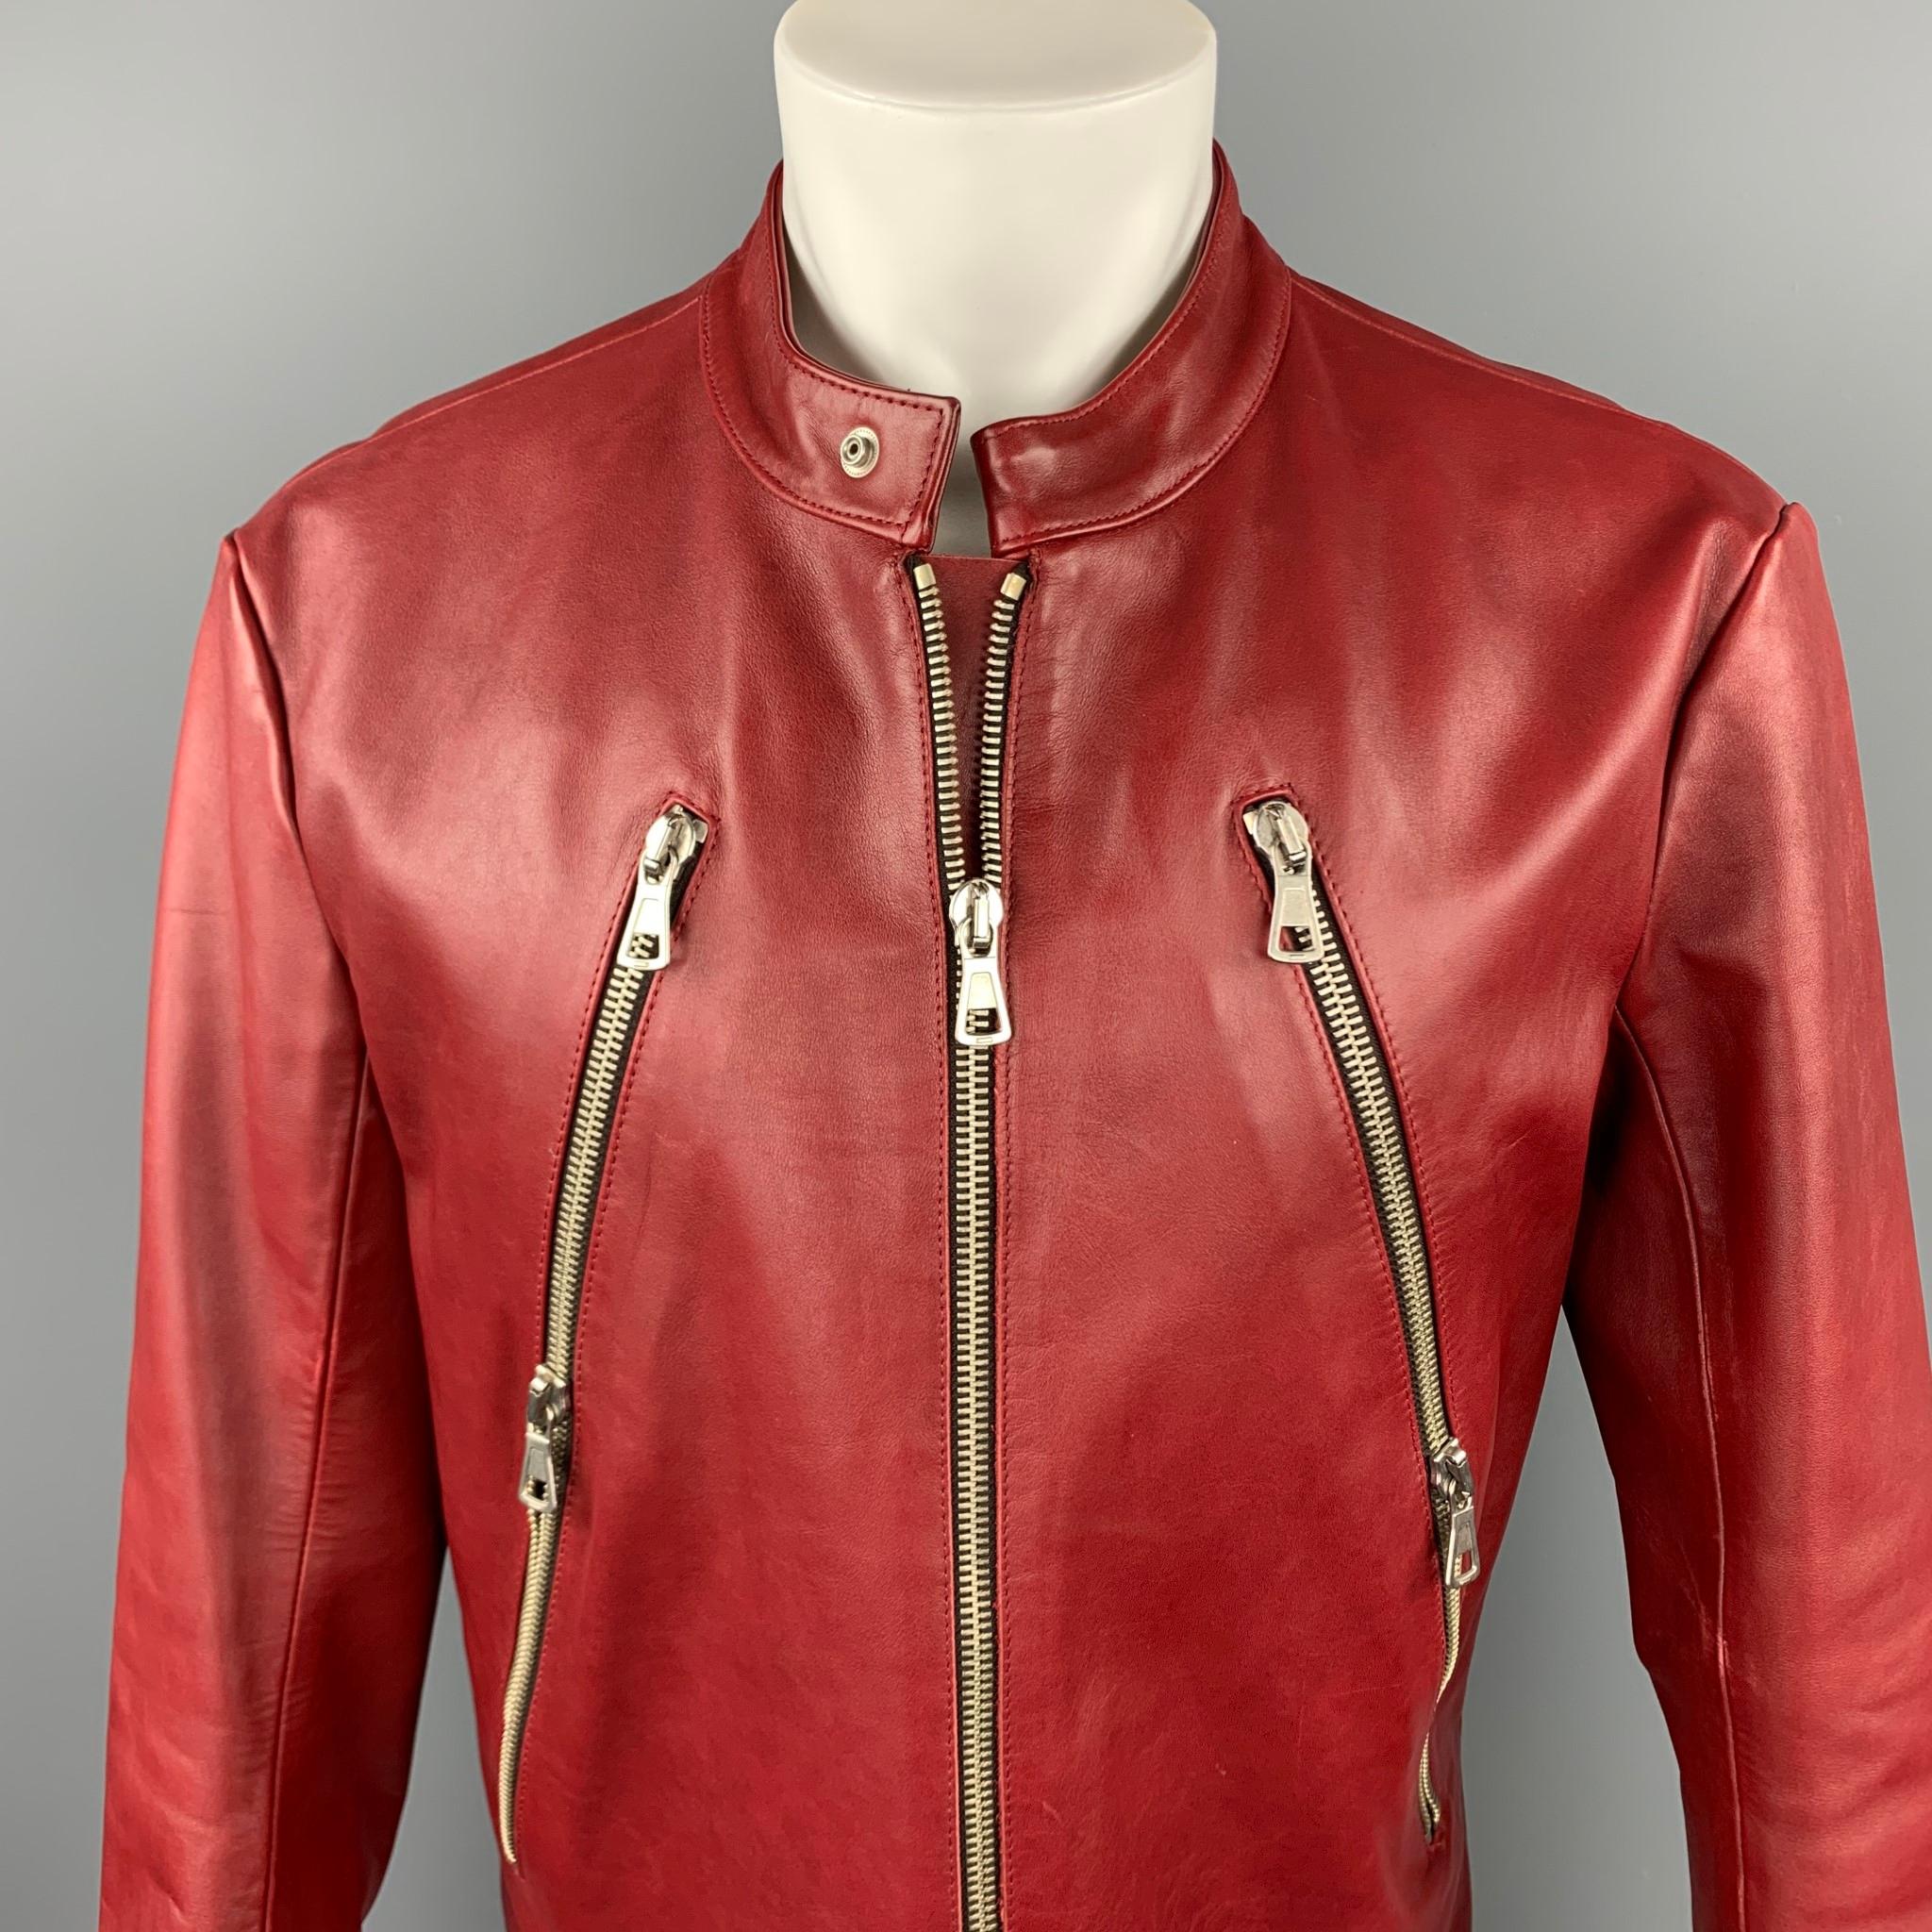 MARTIN MARGIELA jacket comes in a brick red leather featuring a motorcycle style, front zipper pockets, zipper sleeves, buttoned collar, armpit hole details, and a zip up closure. Mino wear. Made in Italy.

Very Good Pre-Owned Condition.
Marked: No